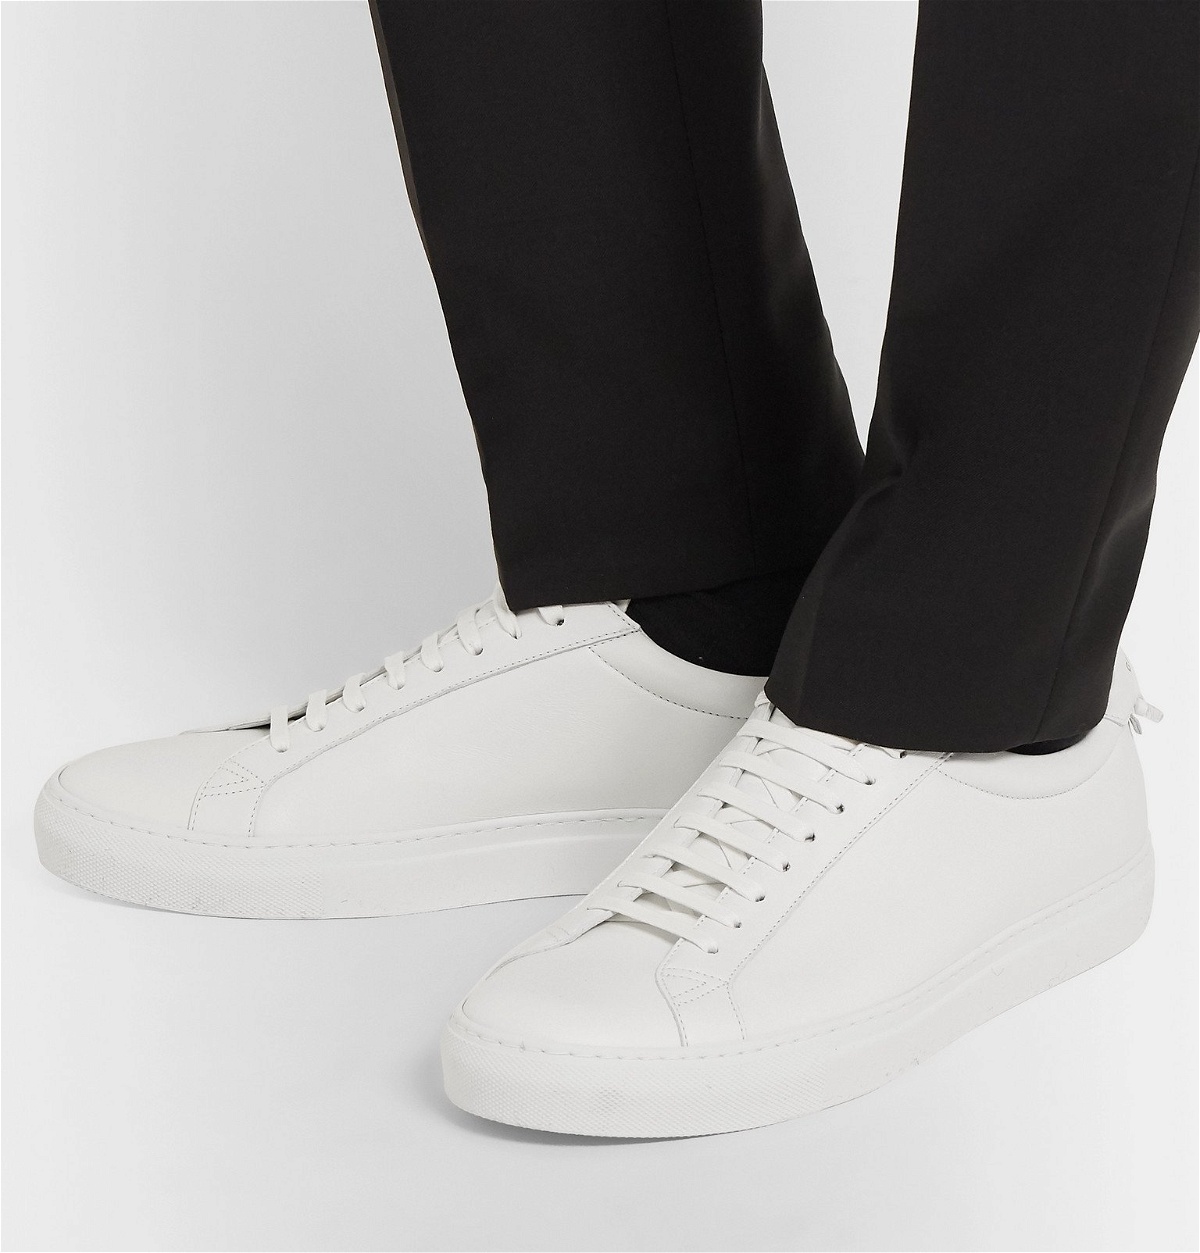 Givenchy - Urban Street Leather Sneakers - White Givenchy